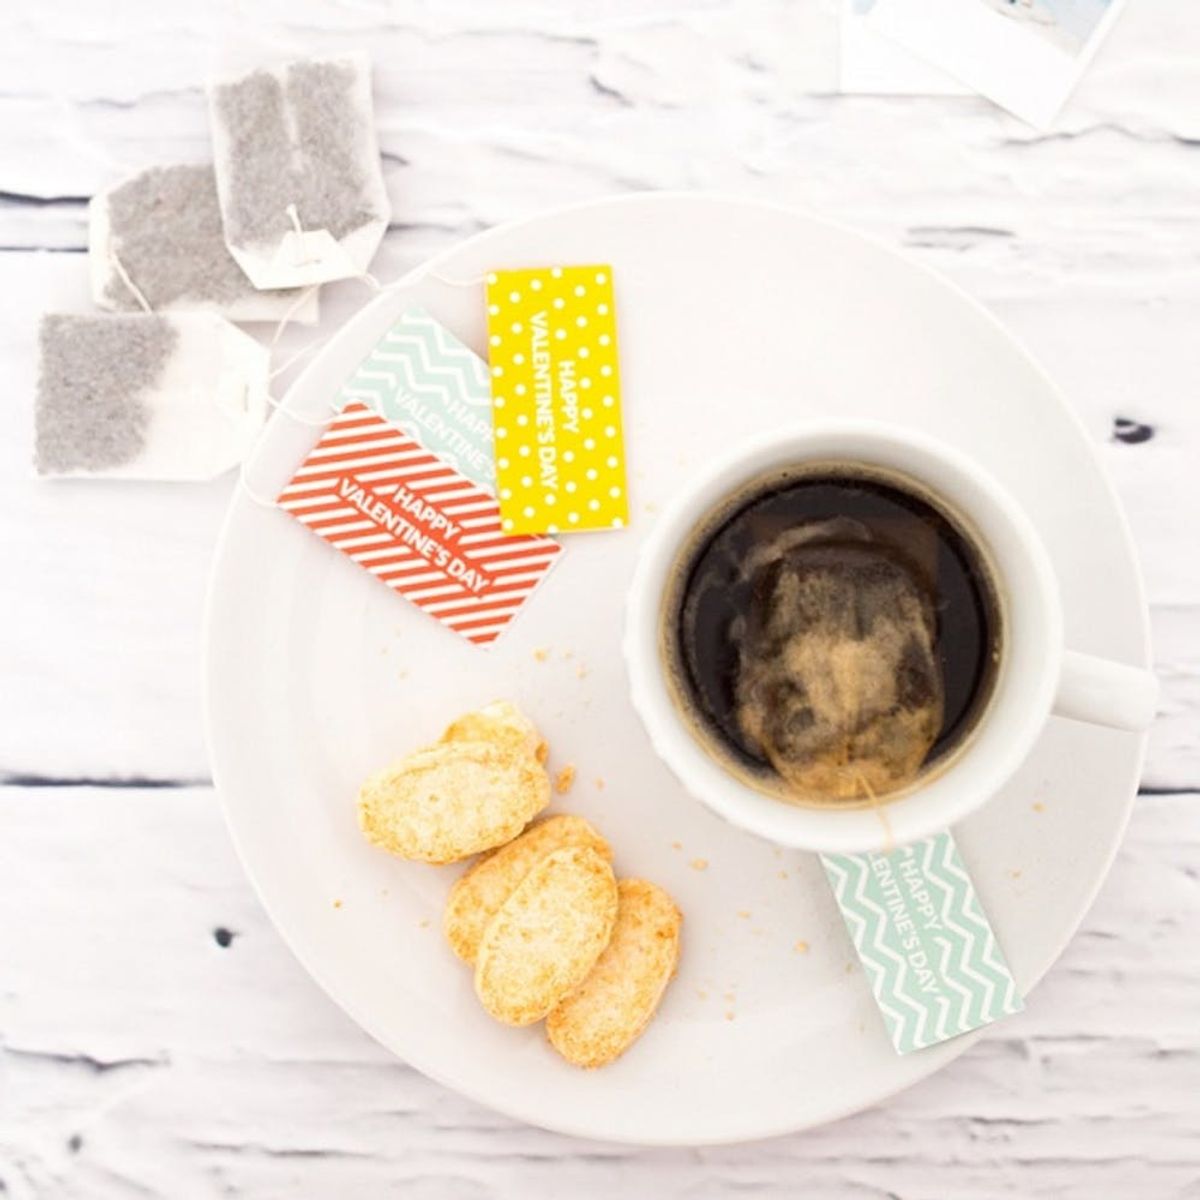 Add a Romantic Touch to Your Breakfast With These Valentine’s Day Tea Tags